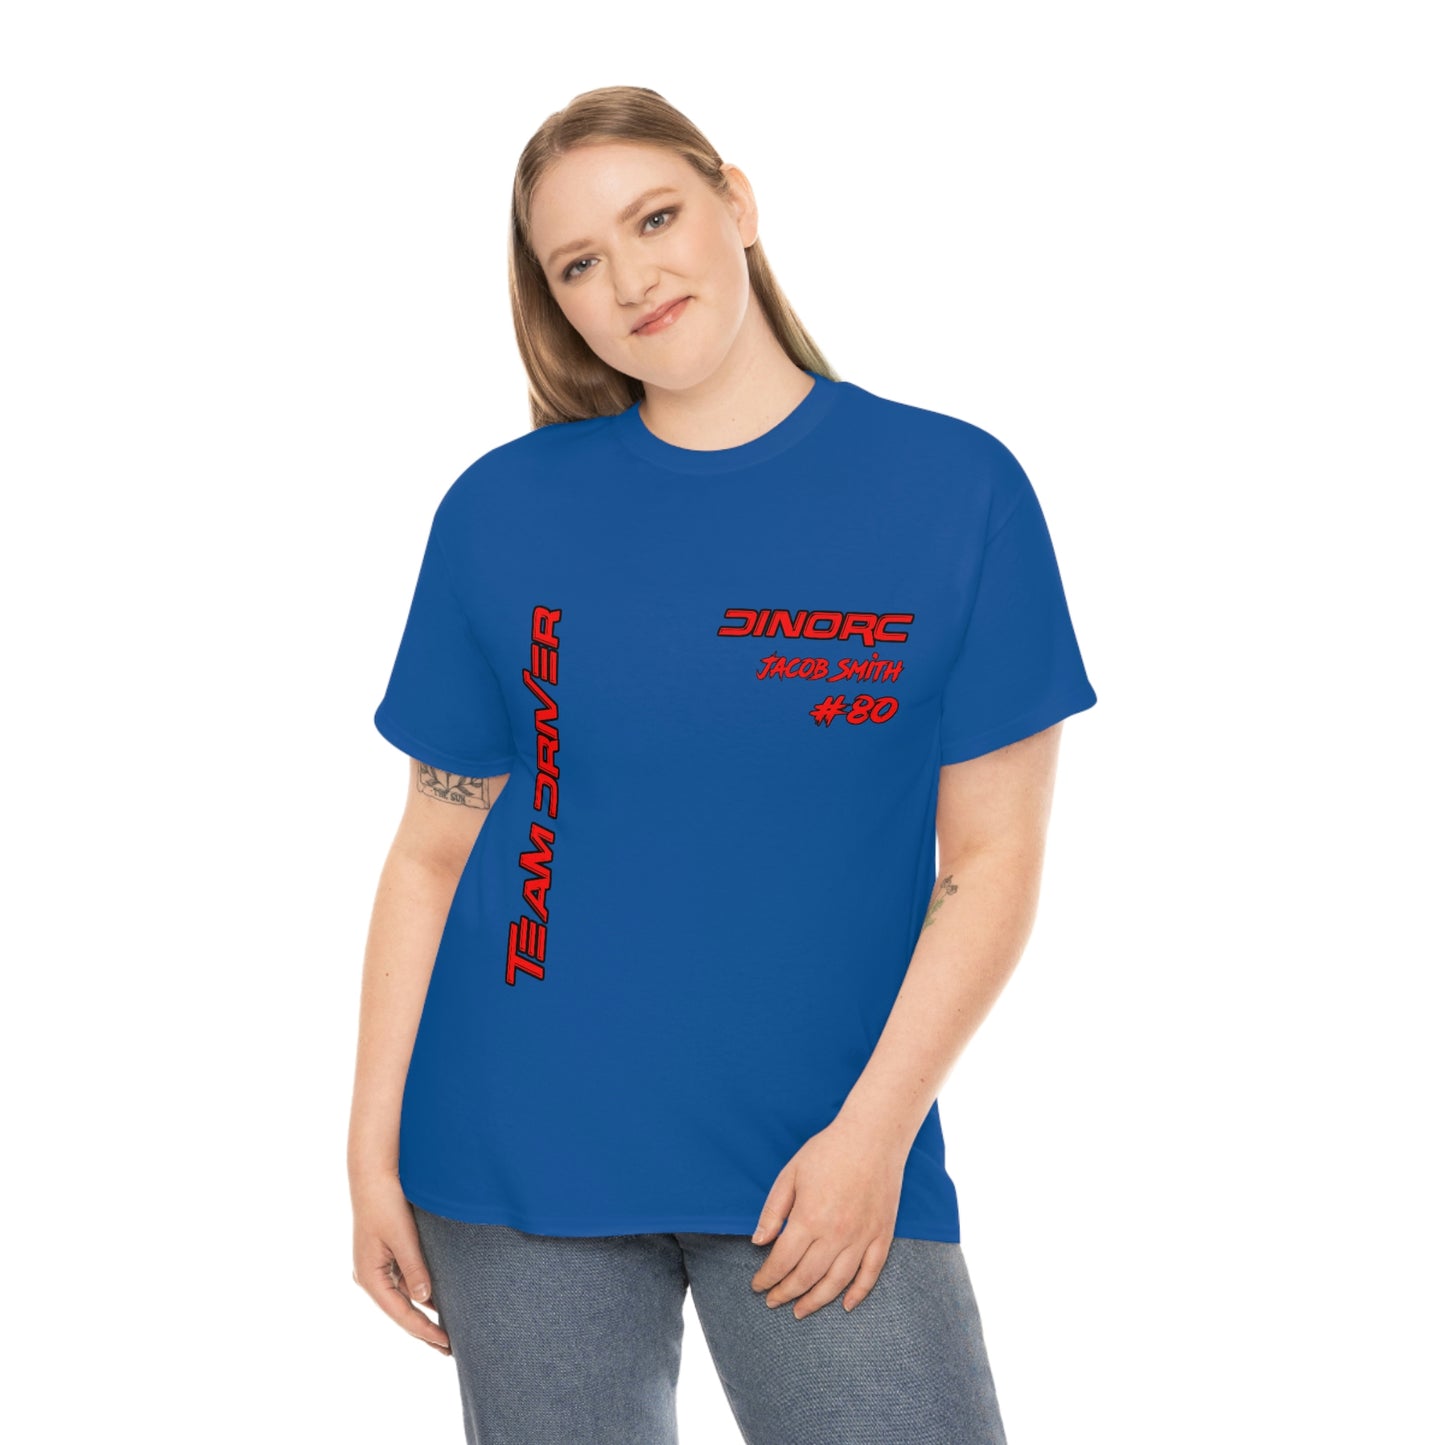 Team Driver Jacob Smith  Front and Back DinoRc Logo T-Shirt S-5x 5 colors